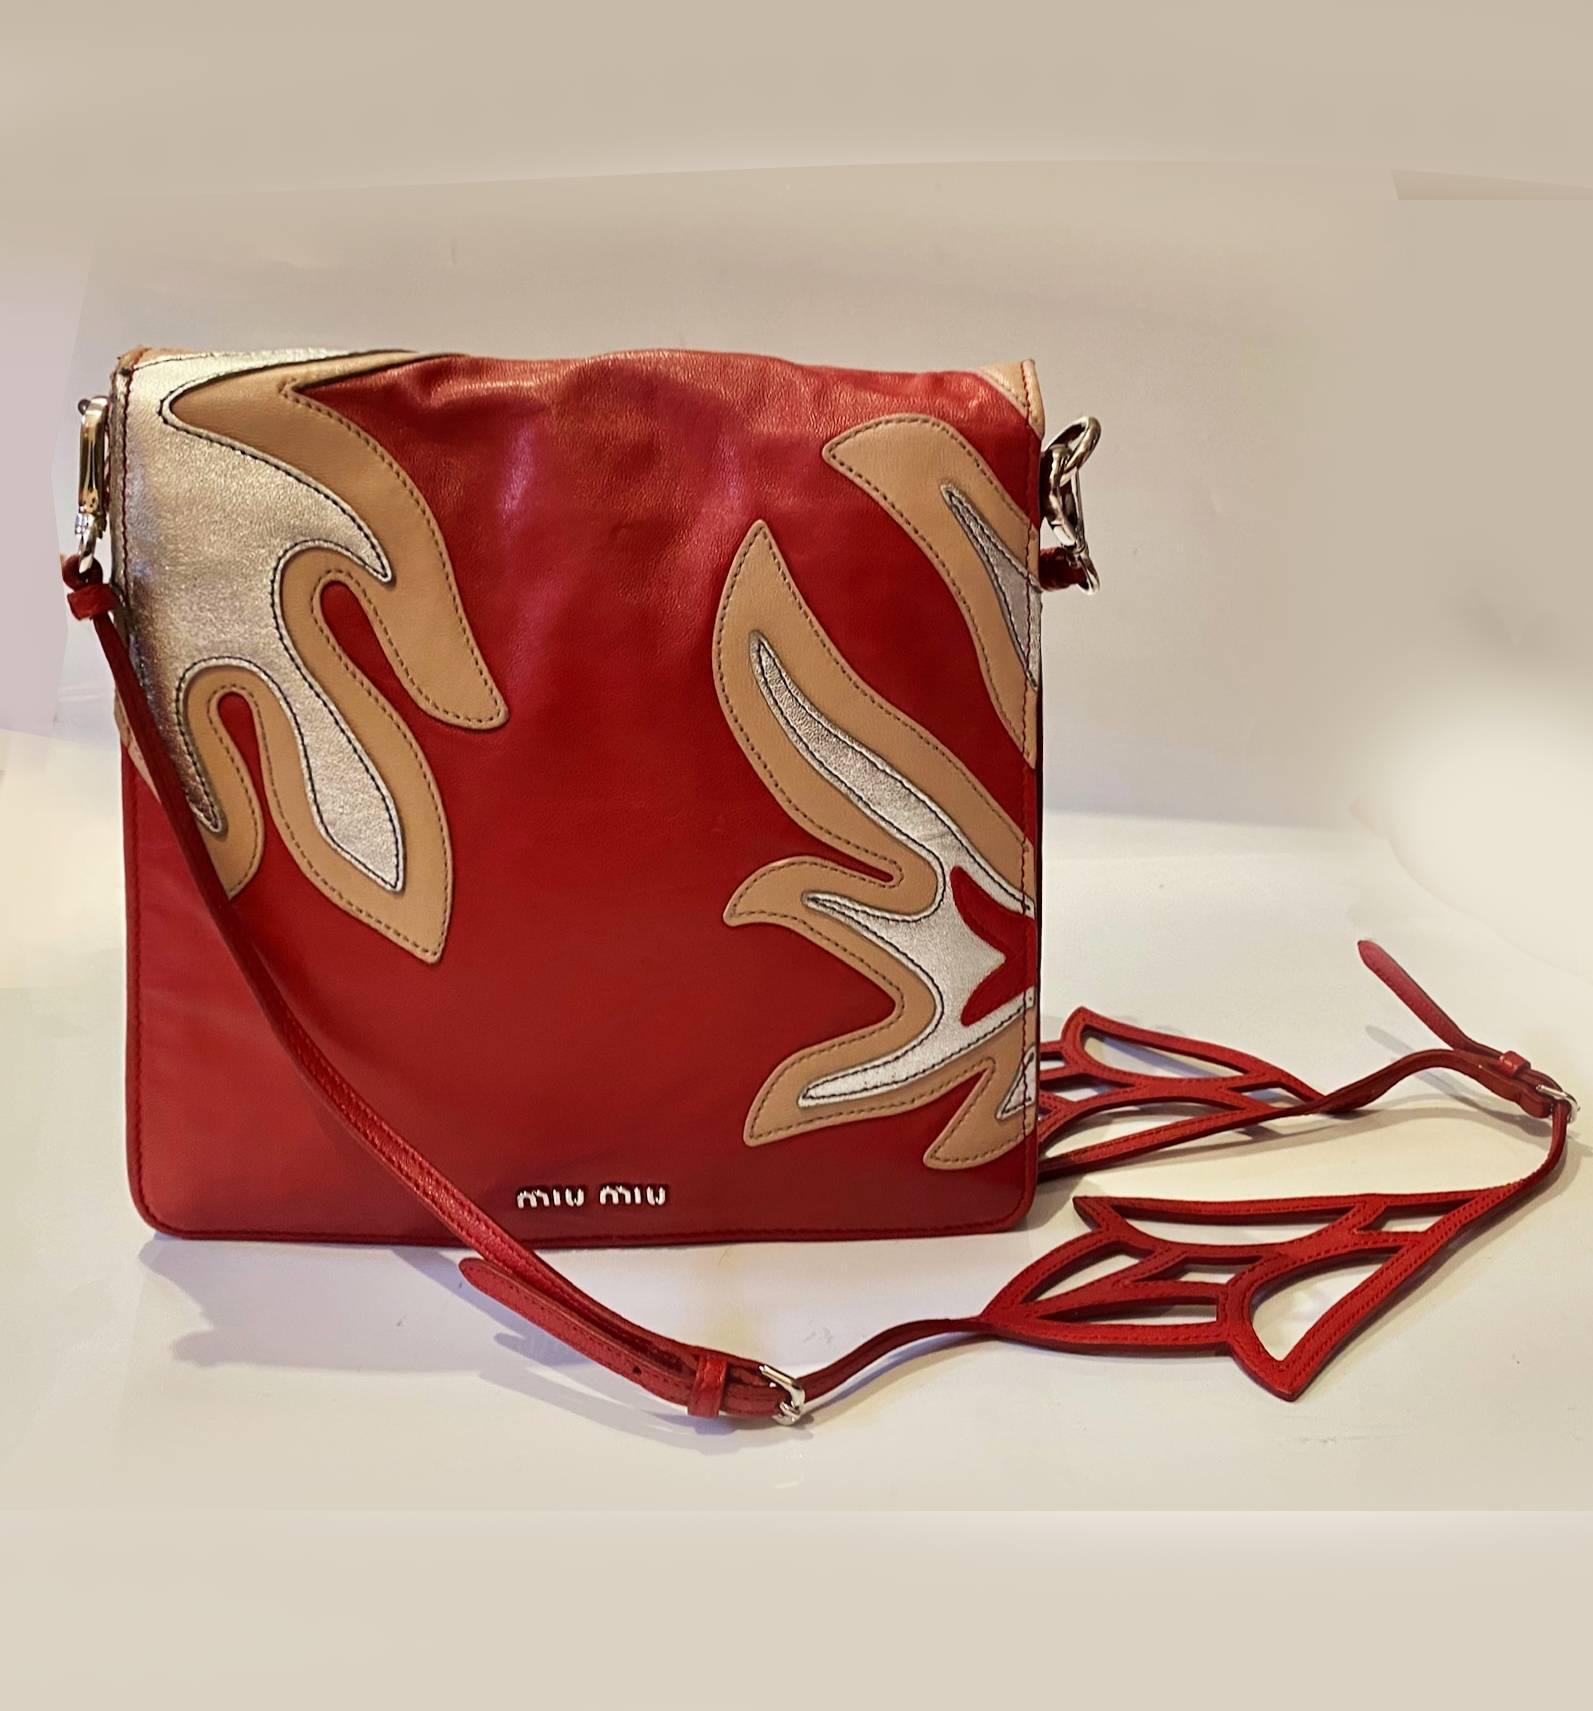 2000's miu miu shoulder bag, very soft, mainly red with black, silver and beige flower deco, cutout flower detail to detachable shoulder strap, 3 sections plus internal zip, silver metalware, Made in Italy  This luxury piece is the perfect blend of